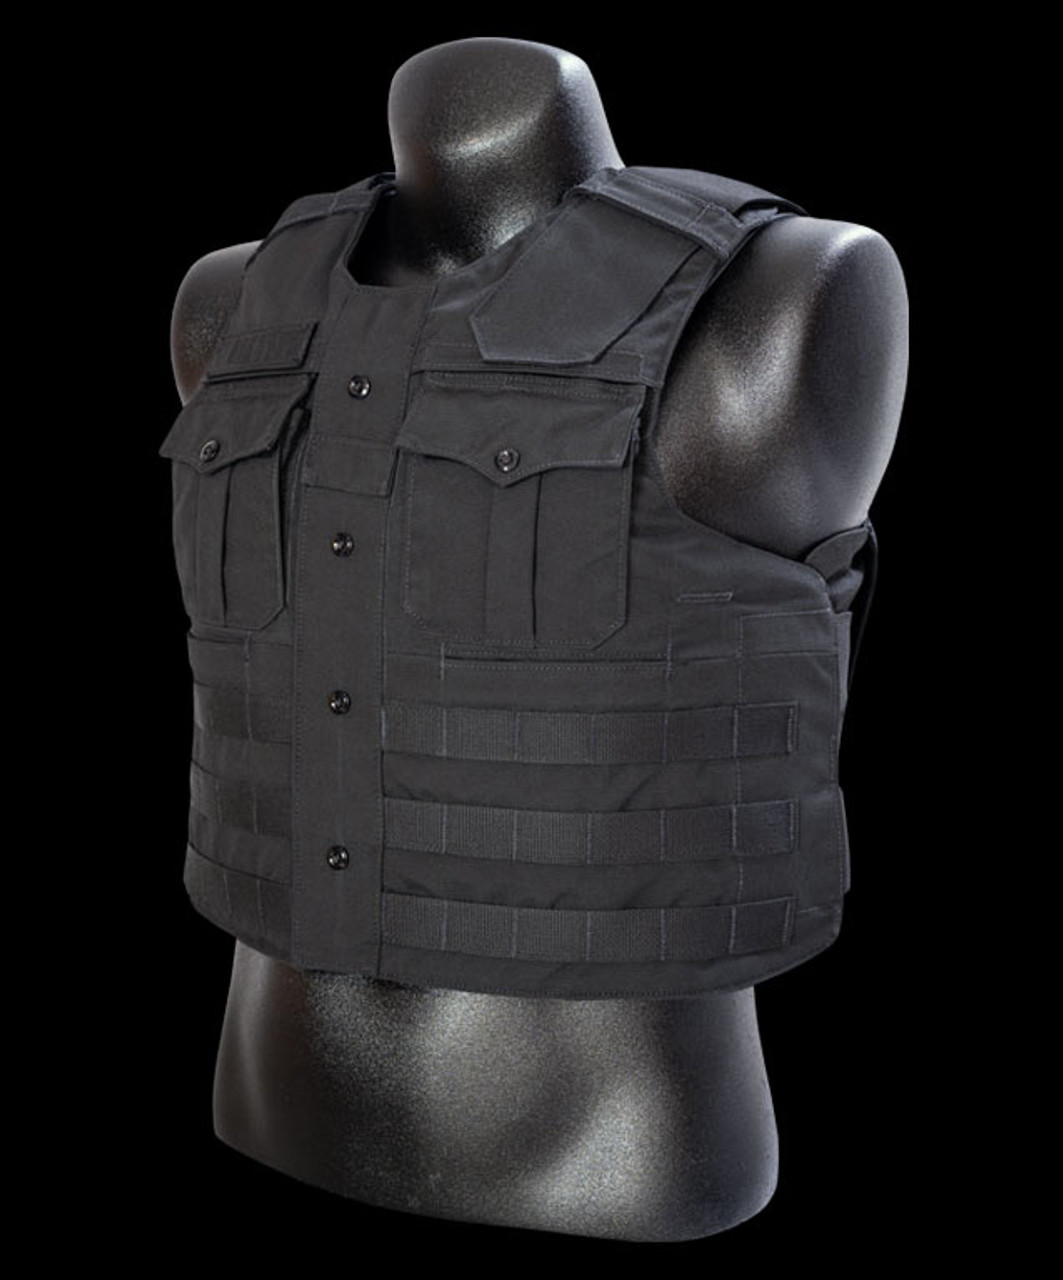 Point Blank Guardian Ballistic Body Armor Vest, For Military and Police,  Available with NIJ .06 Level II, IIA and IIIA Ballistic Systems - Dana  Safety Supply